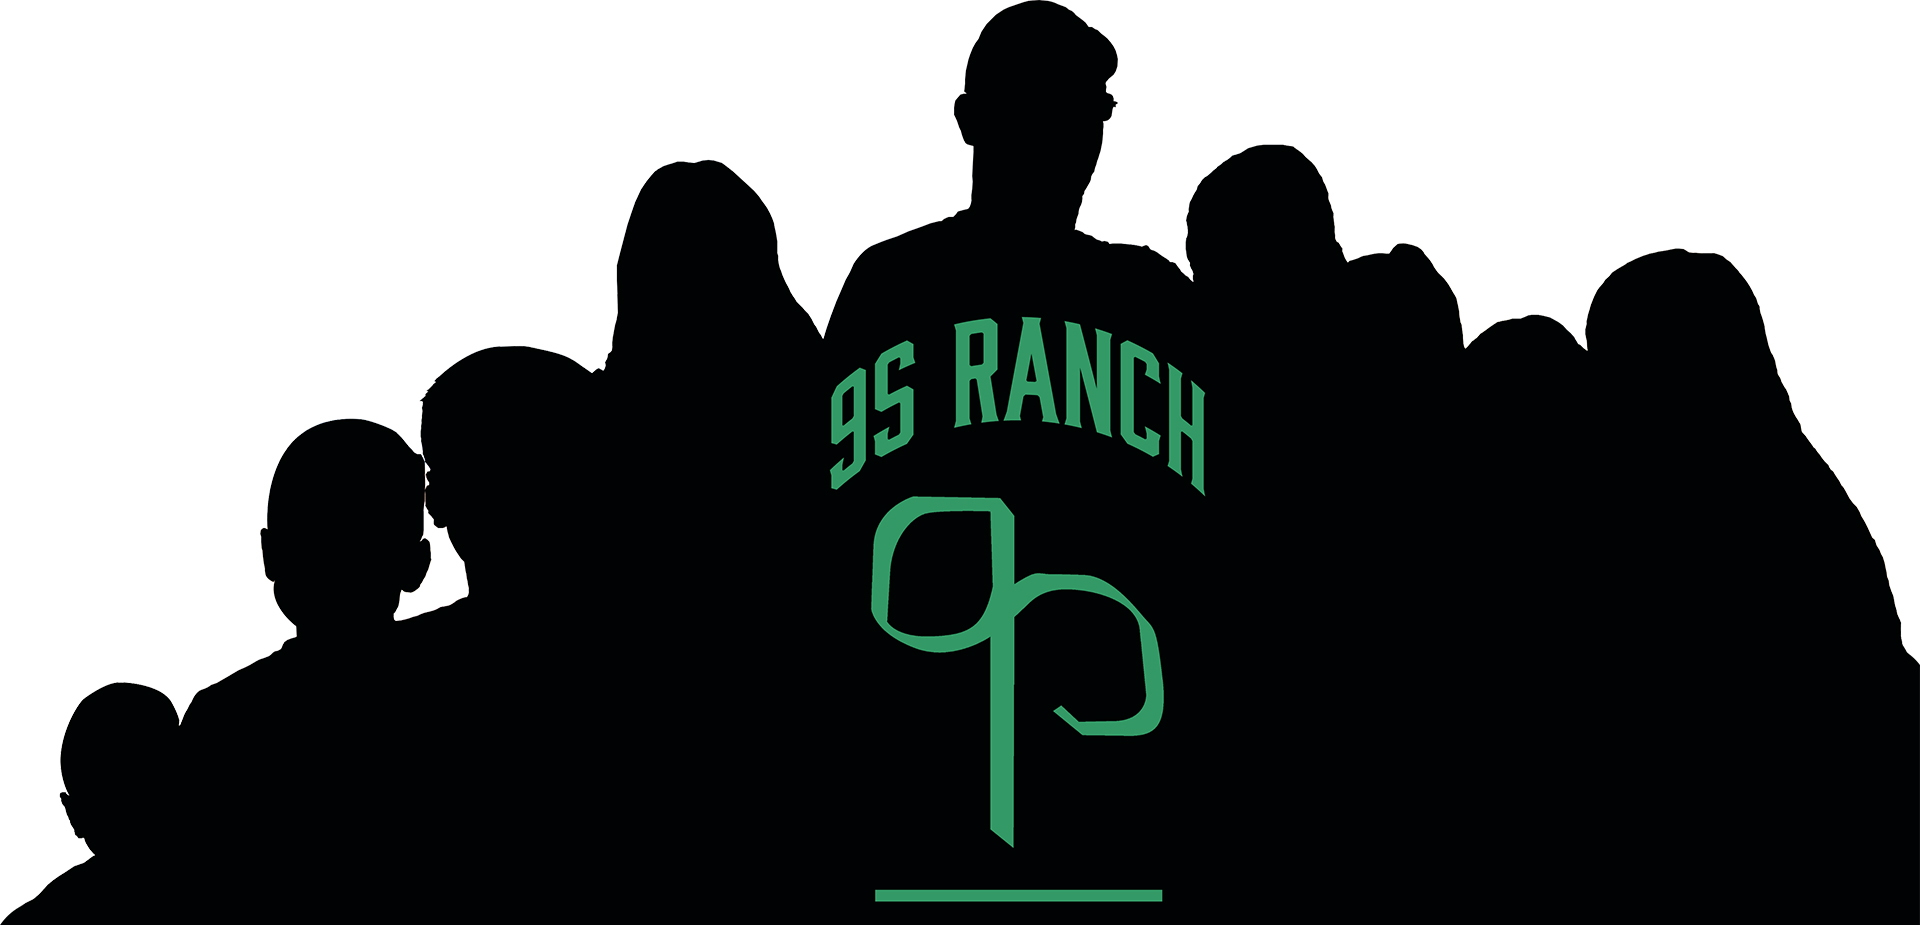 The 9S Ranch Family